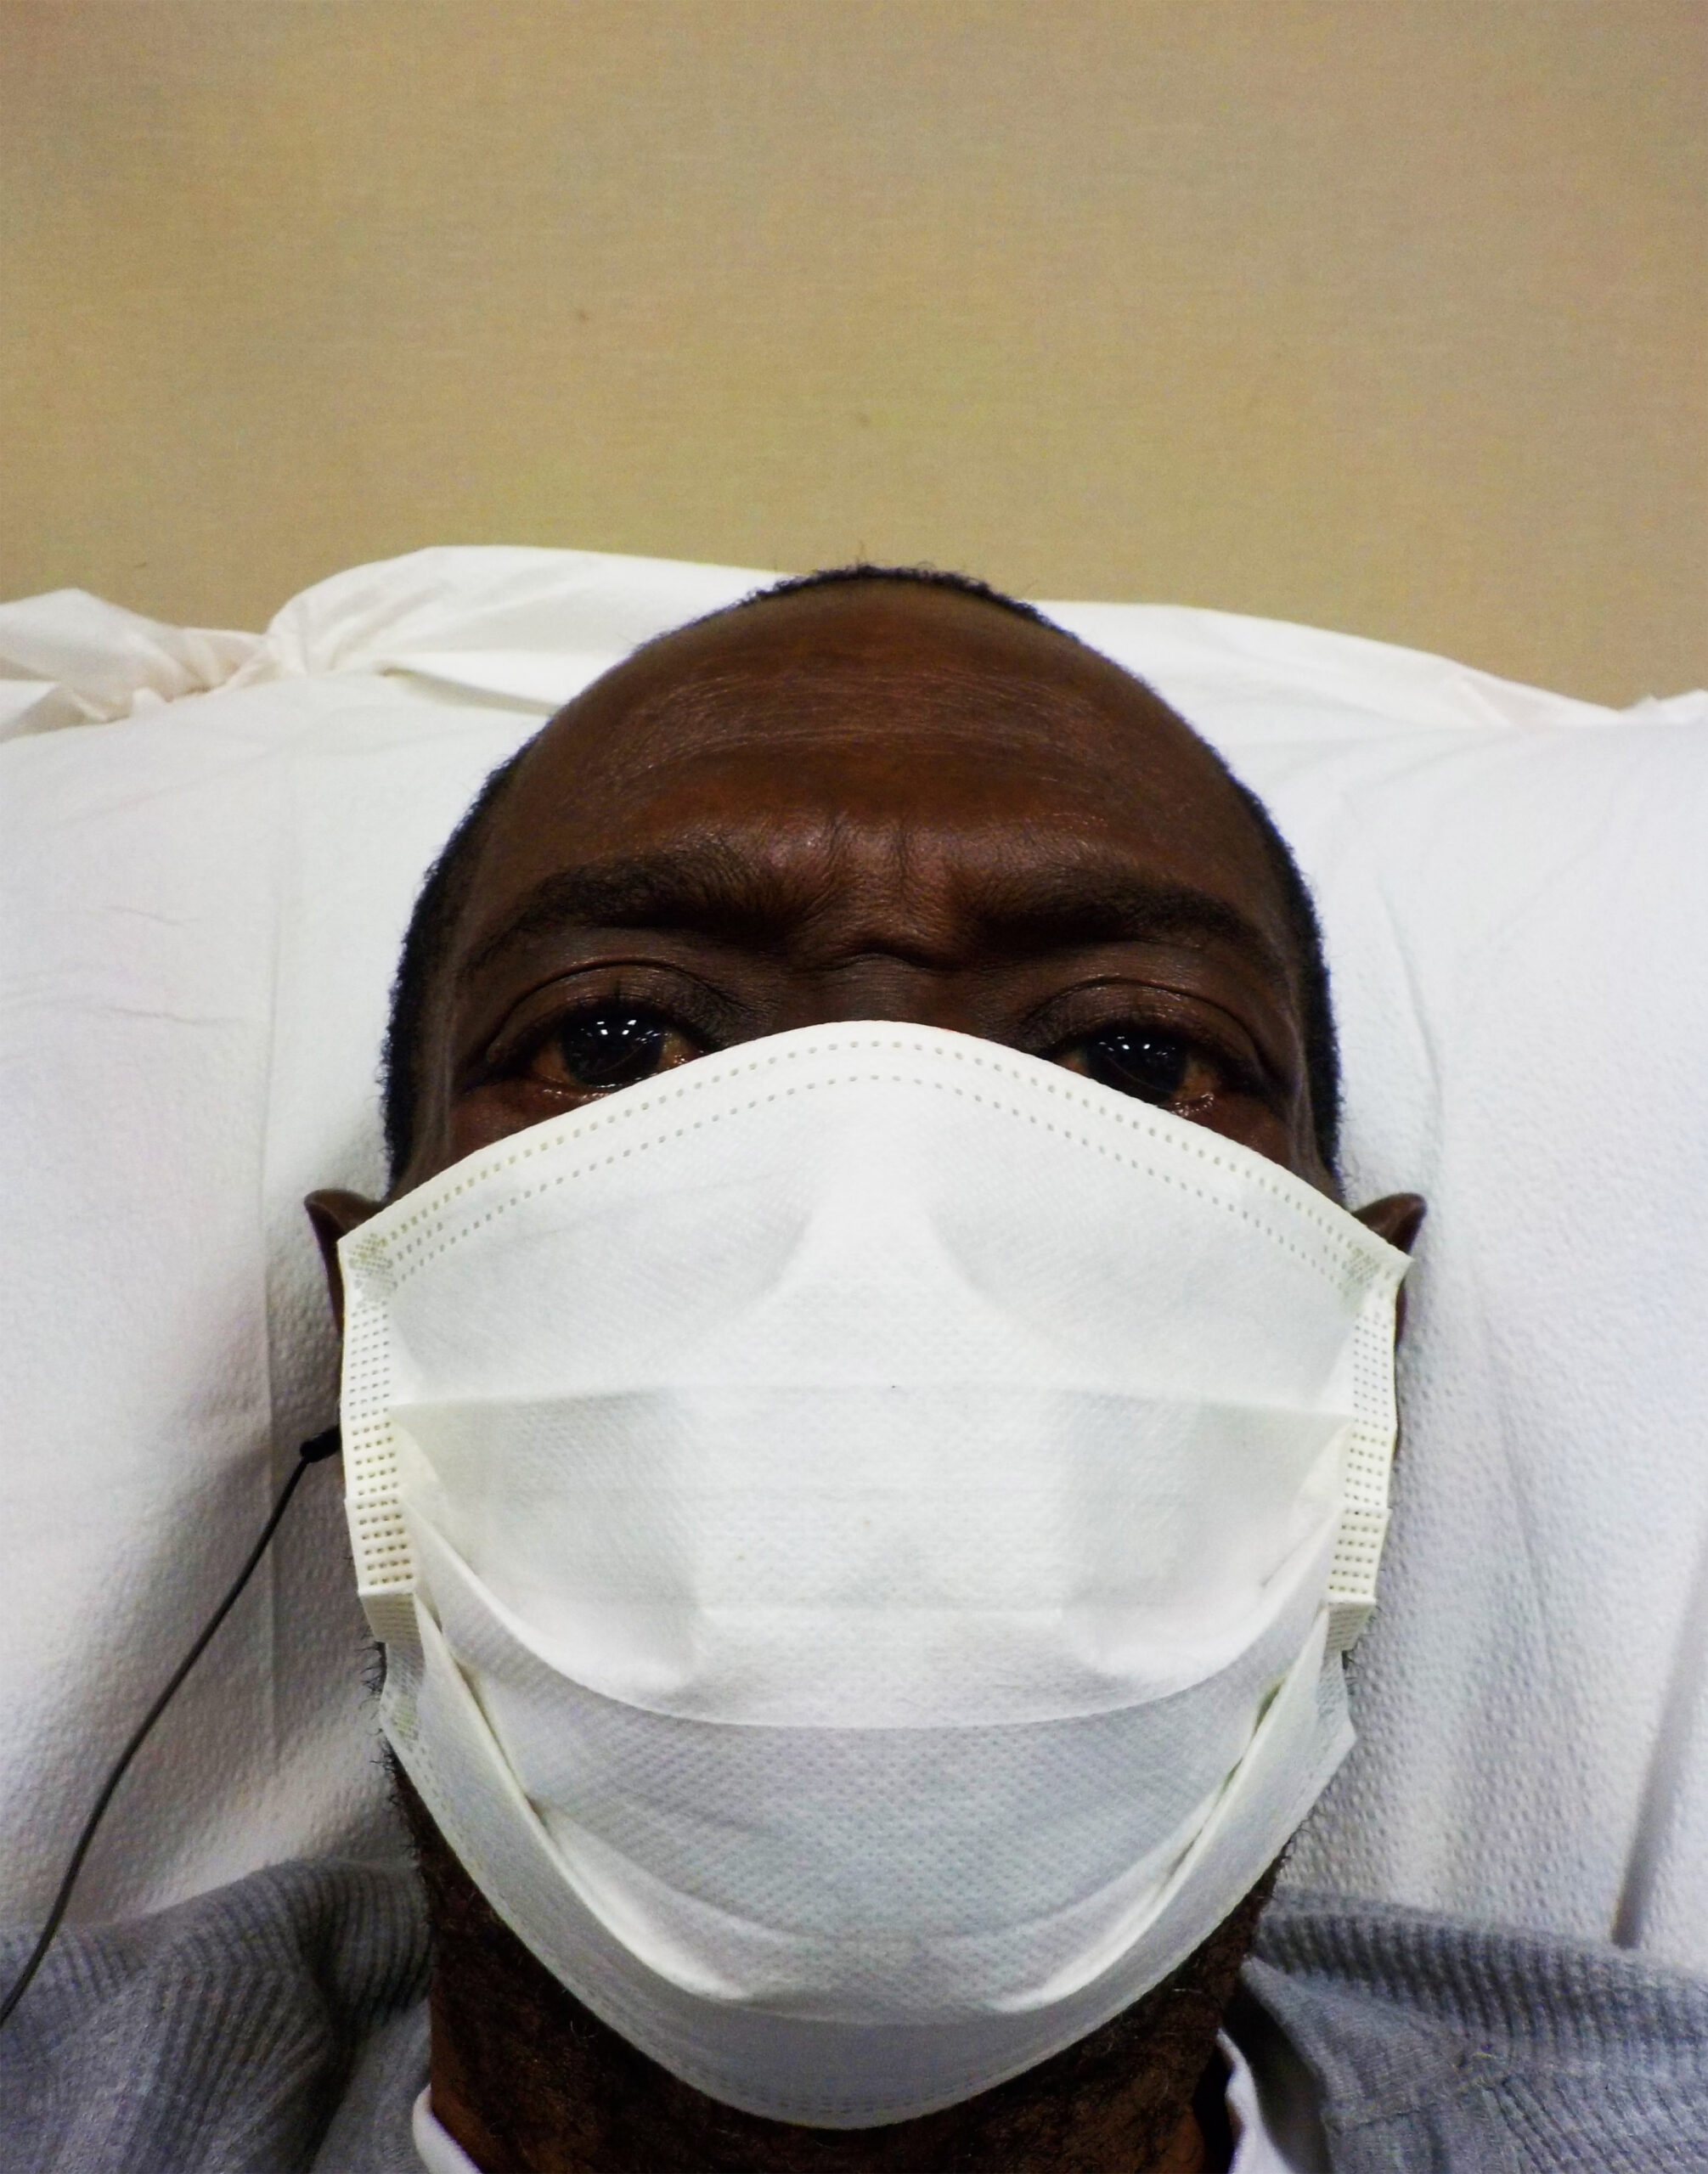 Photo showing Joseph's head, laying on a pillow in a medical facility, wearing a mask.